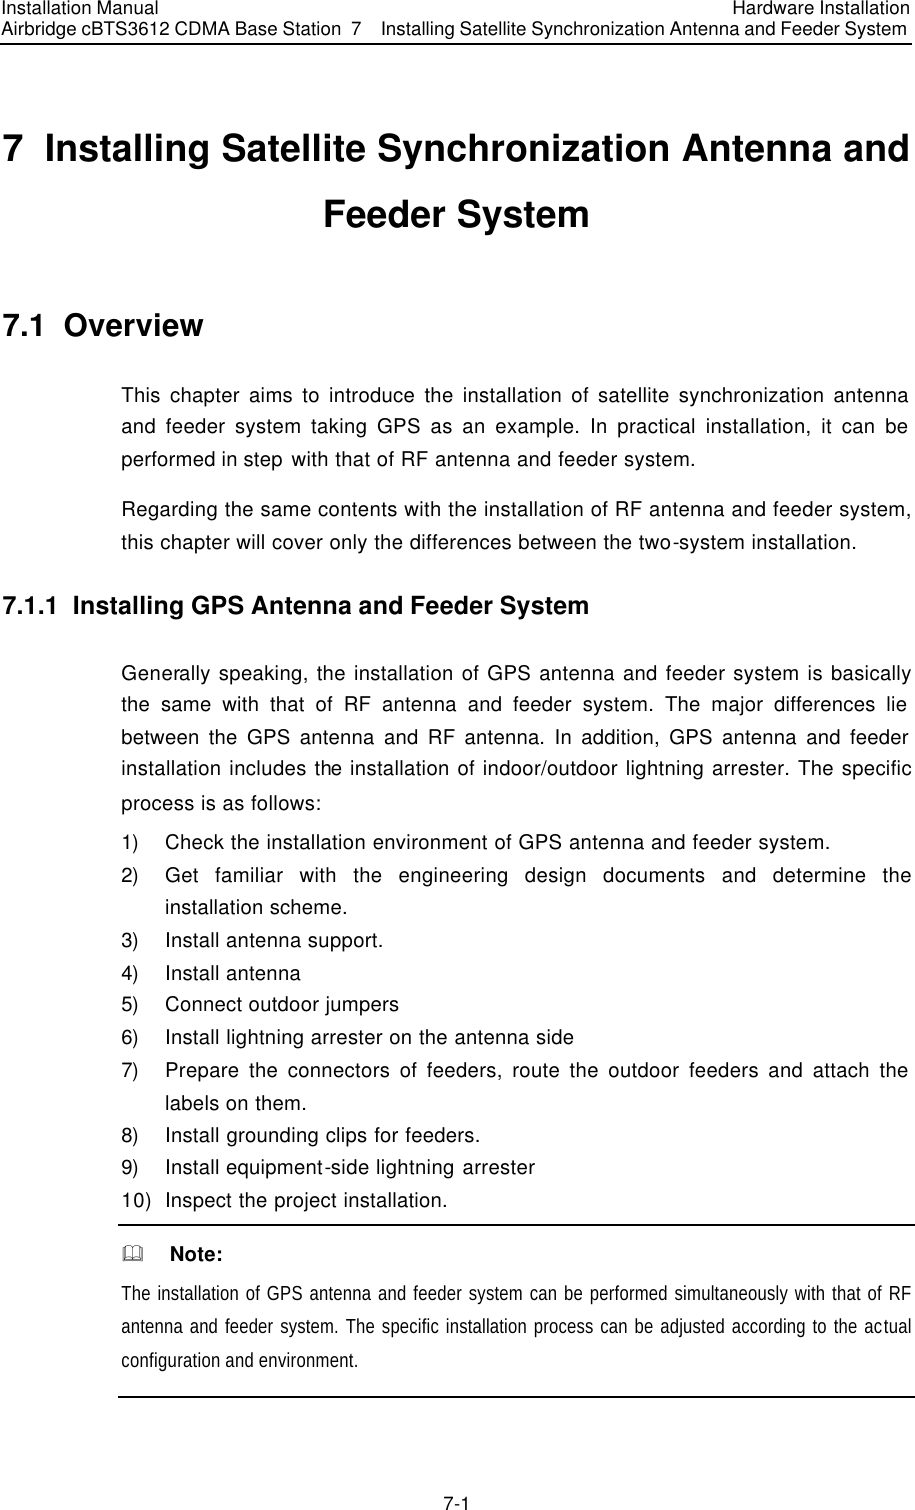 Installation Manual Airbridge cBTS3612 CDMA Base Station Hardware Installation 7  Installing Satellite Synchronization Antenna and Feeder System  7-1　7  Installing Satellite Synchronization Antenna and Feeder System 7.1  Overview This chapter aims to introduce the installation of satellite synchronization antenna and feeder system taking GPS as an example. In practical installation, it can be performed in step with that of RF antenna and feeder system.   Regarding the same contents with the installation of RF antenna and feeder system, this chapter will cover only the differences between the two-system installation. 7.1.1  Installing GPS Antenna and Feeder System   Generally speaking, the installation of GPS antenna and feeder system is basically the same with that of RF antenna and feeder system. The major differences lie between the GPS antenna and RF antenna. In addition, GPS antenna and feeder installation includes the installation of indoor/outdoor lightning arrester. The specific process is as follows: 1) Check the installation environment of GPS antenna and feeder system. 2) Get familiar with the engineering design documents and determine the installation scheme. 3) Install antenna support. 4) Install antenna 5) Connect outdoor jumpers 6) Install lightning arrester on the antenna side 7) Prepare the connectors of feeders, route the outdoor feeders and attach the labels on them. 8) Install grounding clips for feeders. 9) Install equipment-side lightning arrester 10) Inspect the project installation. &amp;  Note: The installation of GPS antenna and feeder system can be performed simultaneously with that of RF antenna and feeder system. The specific installation process can be adjusted according to the actual configuration and environment.   